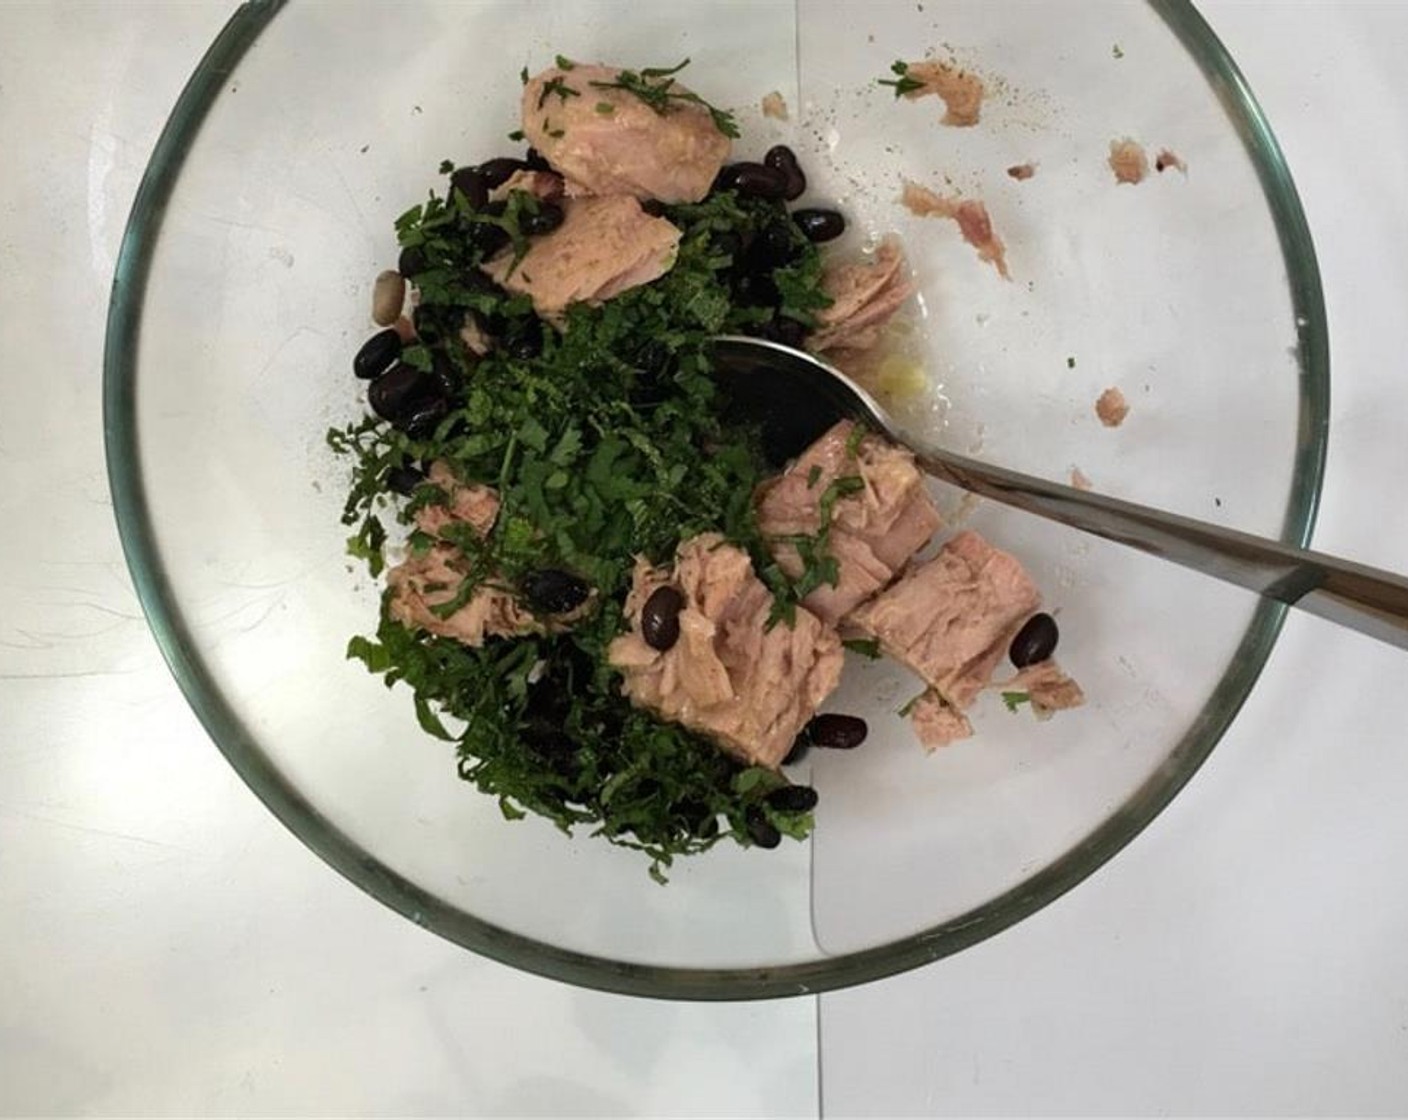 step 4 In another bowl, combine the Canned Tuna (1 can), Canned Black Beans (3 Tbsp), the rest of the Fresh Mint (1/2 handful), Salt (to taste), and Ground Black Pepper (to taste) to taste. Stir the tuna well. Place it in the fridge as well to chill.